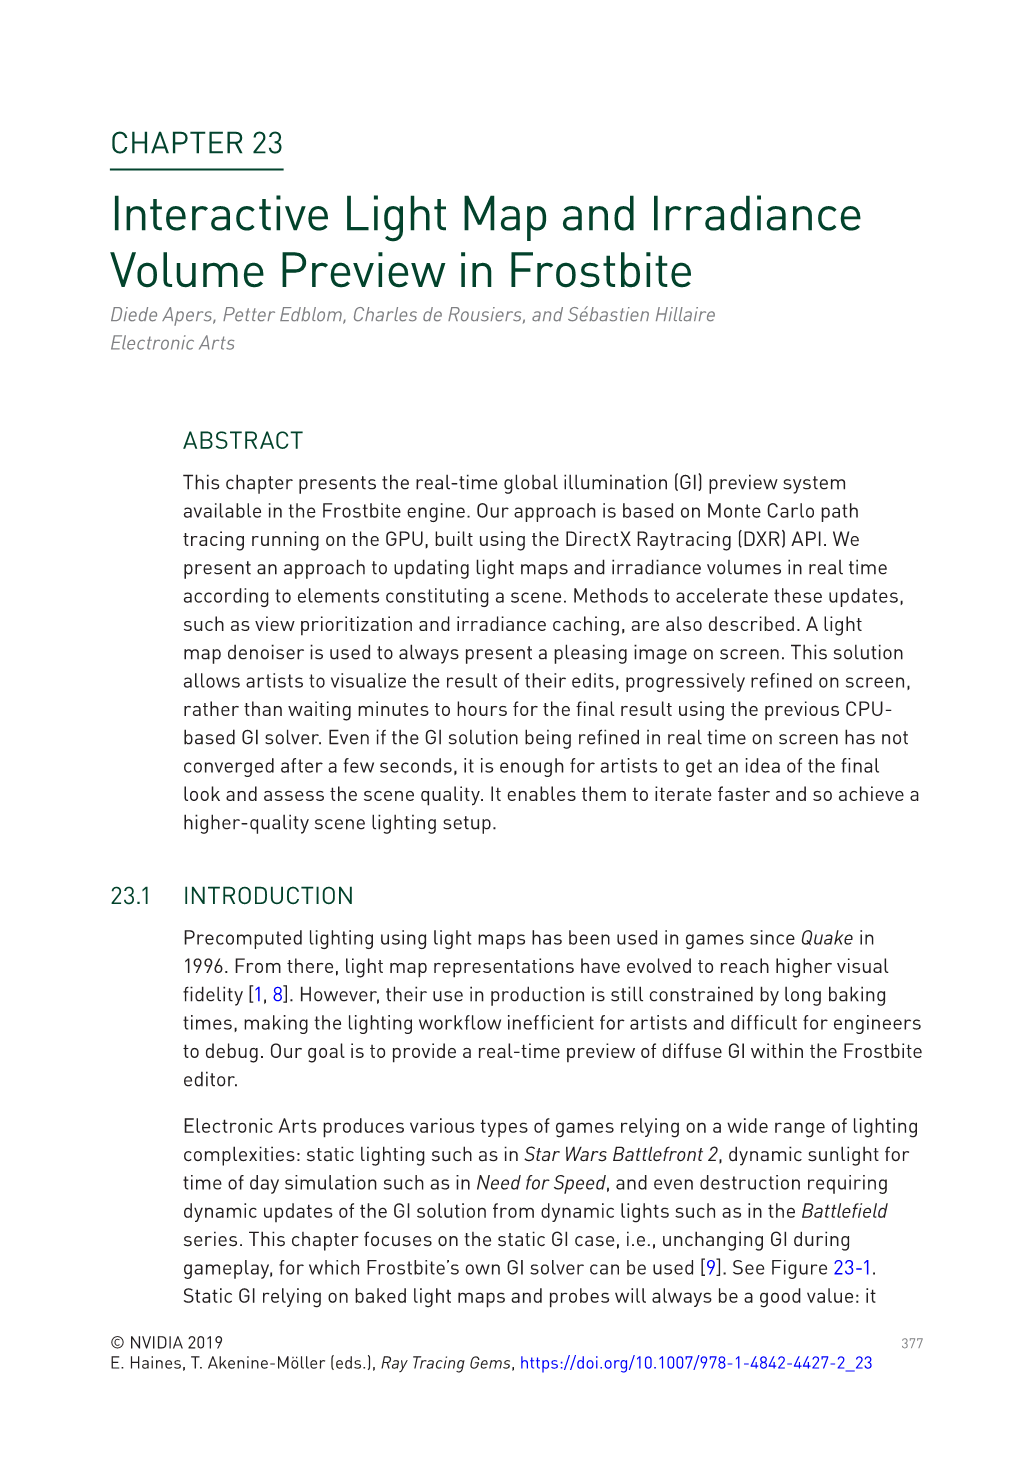 Interactive Light Map and Irradiance Volume Preview in Frostbite Diede Apers, Petter Edblom, Charles De Rousiers, and Sébastien Hillaire Electronic Arts